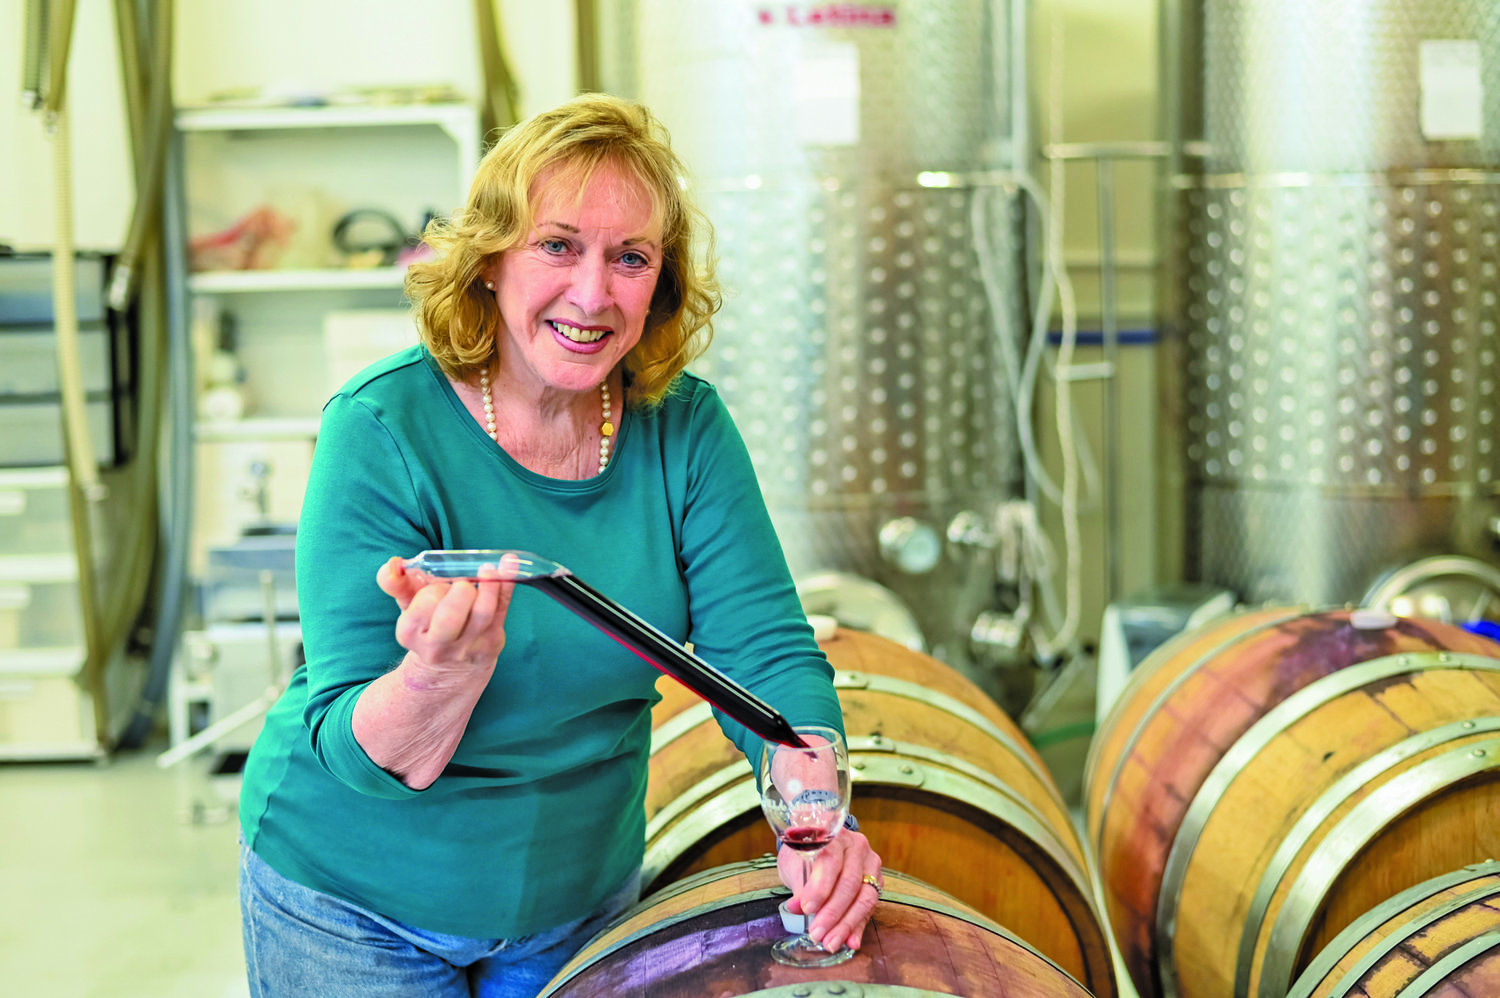 Dr. Audrey Cross taps a barrel in the hilltop winery she and her husband, Stephen Gambino, own in Finesville, N.J., just across the Delaware River from Riegelsville.